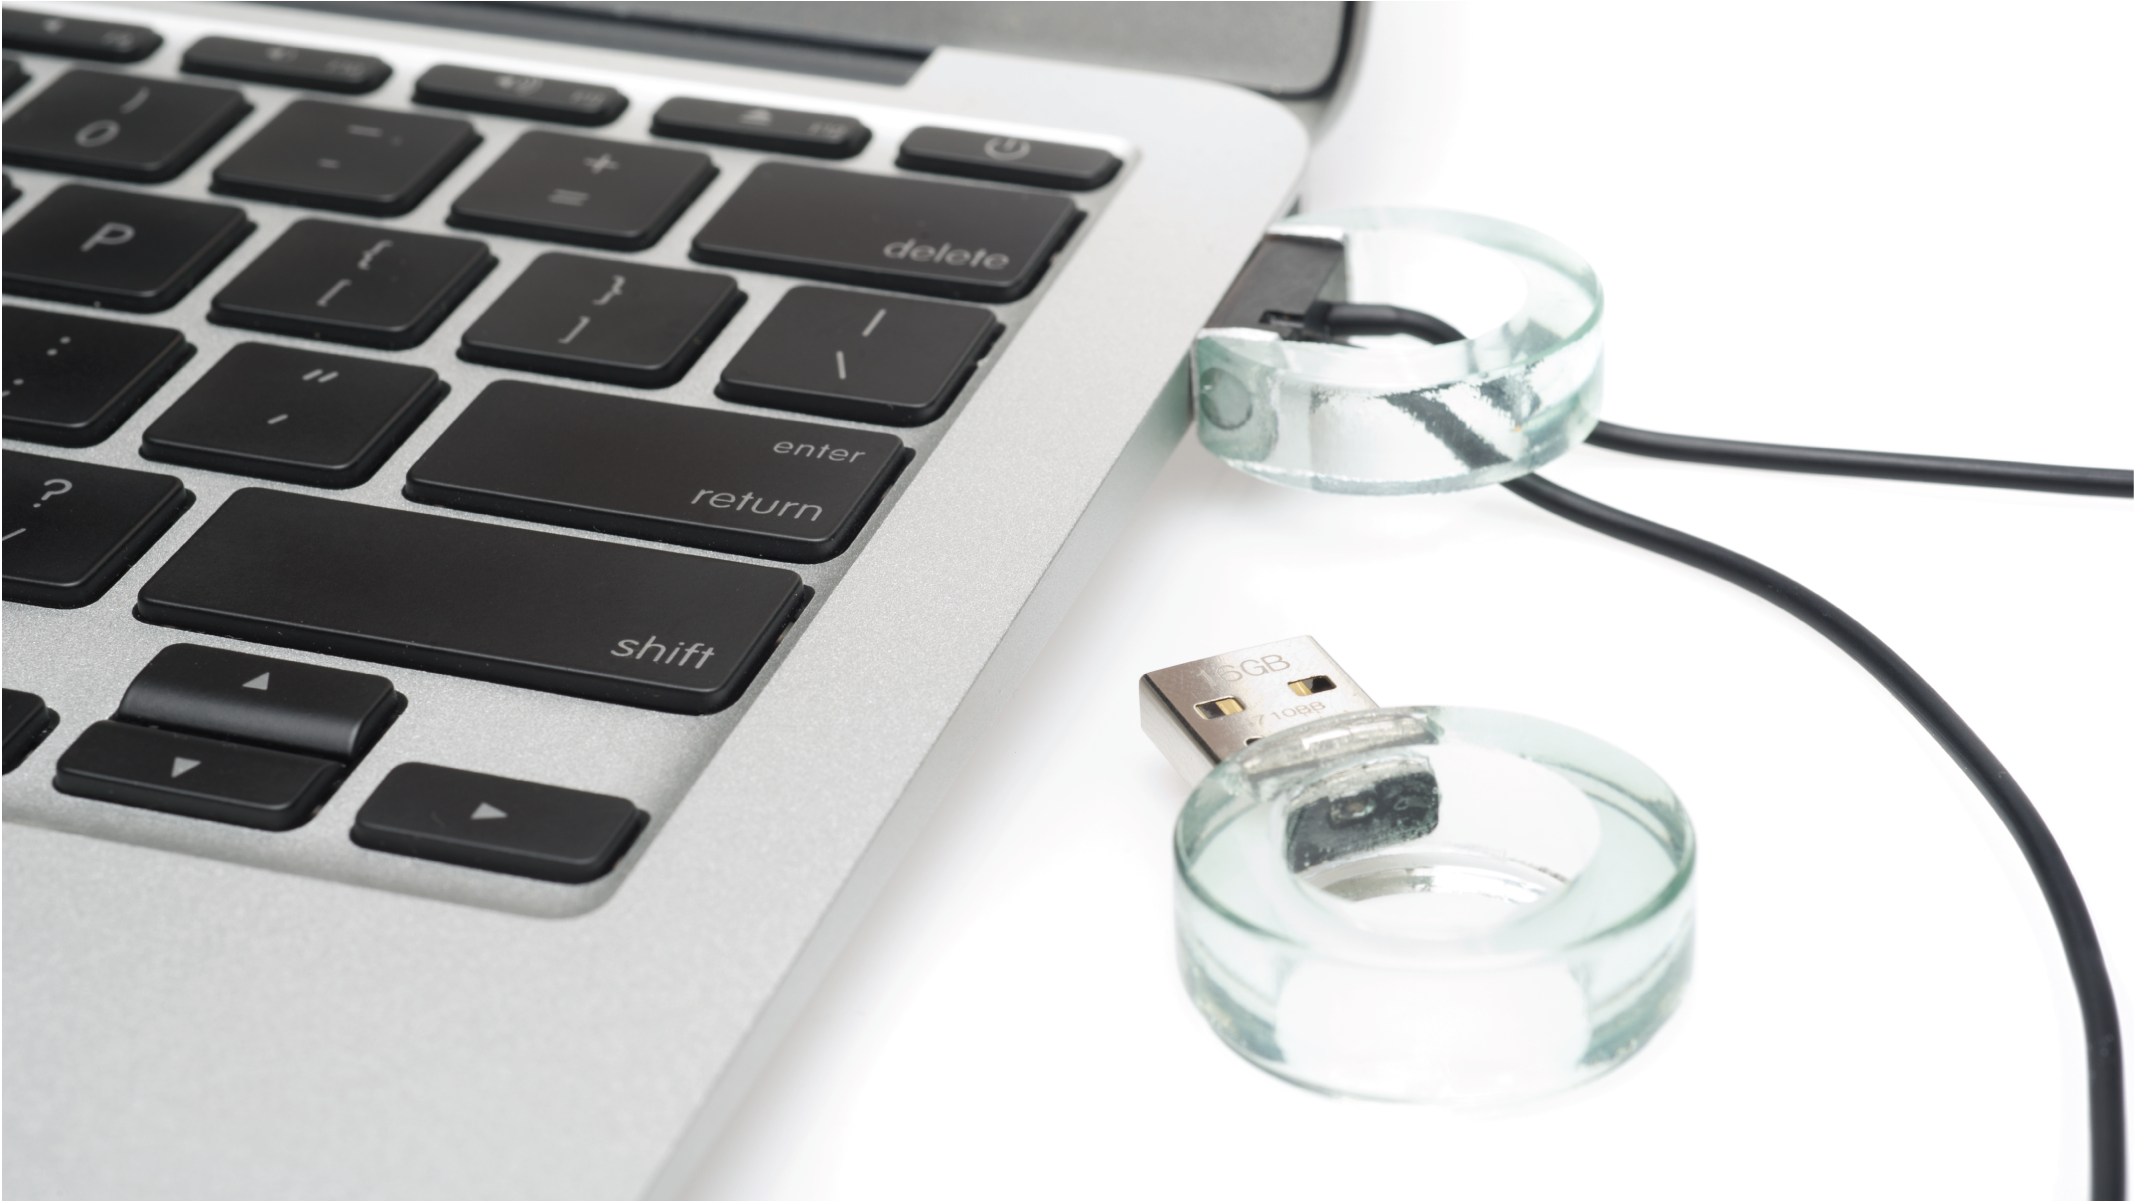 Glass Ring with a USB port connected to the computer